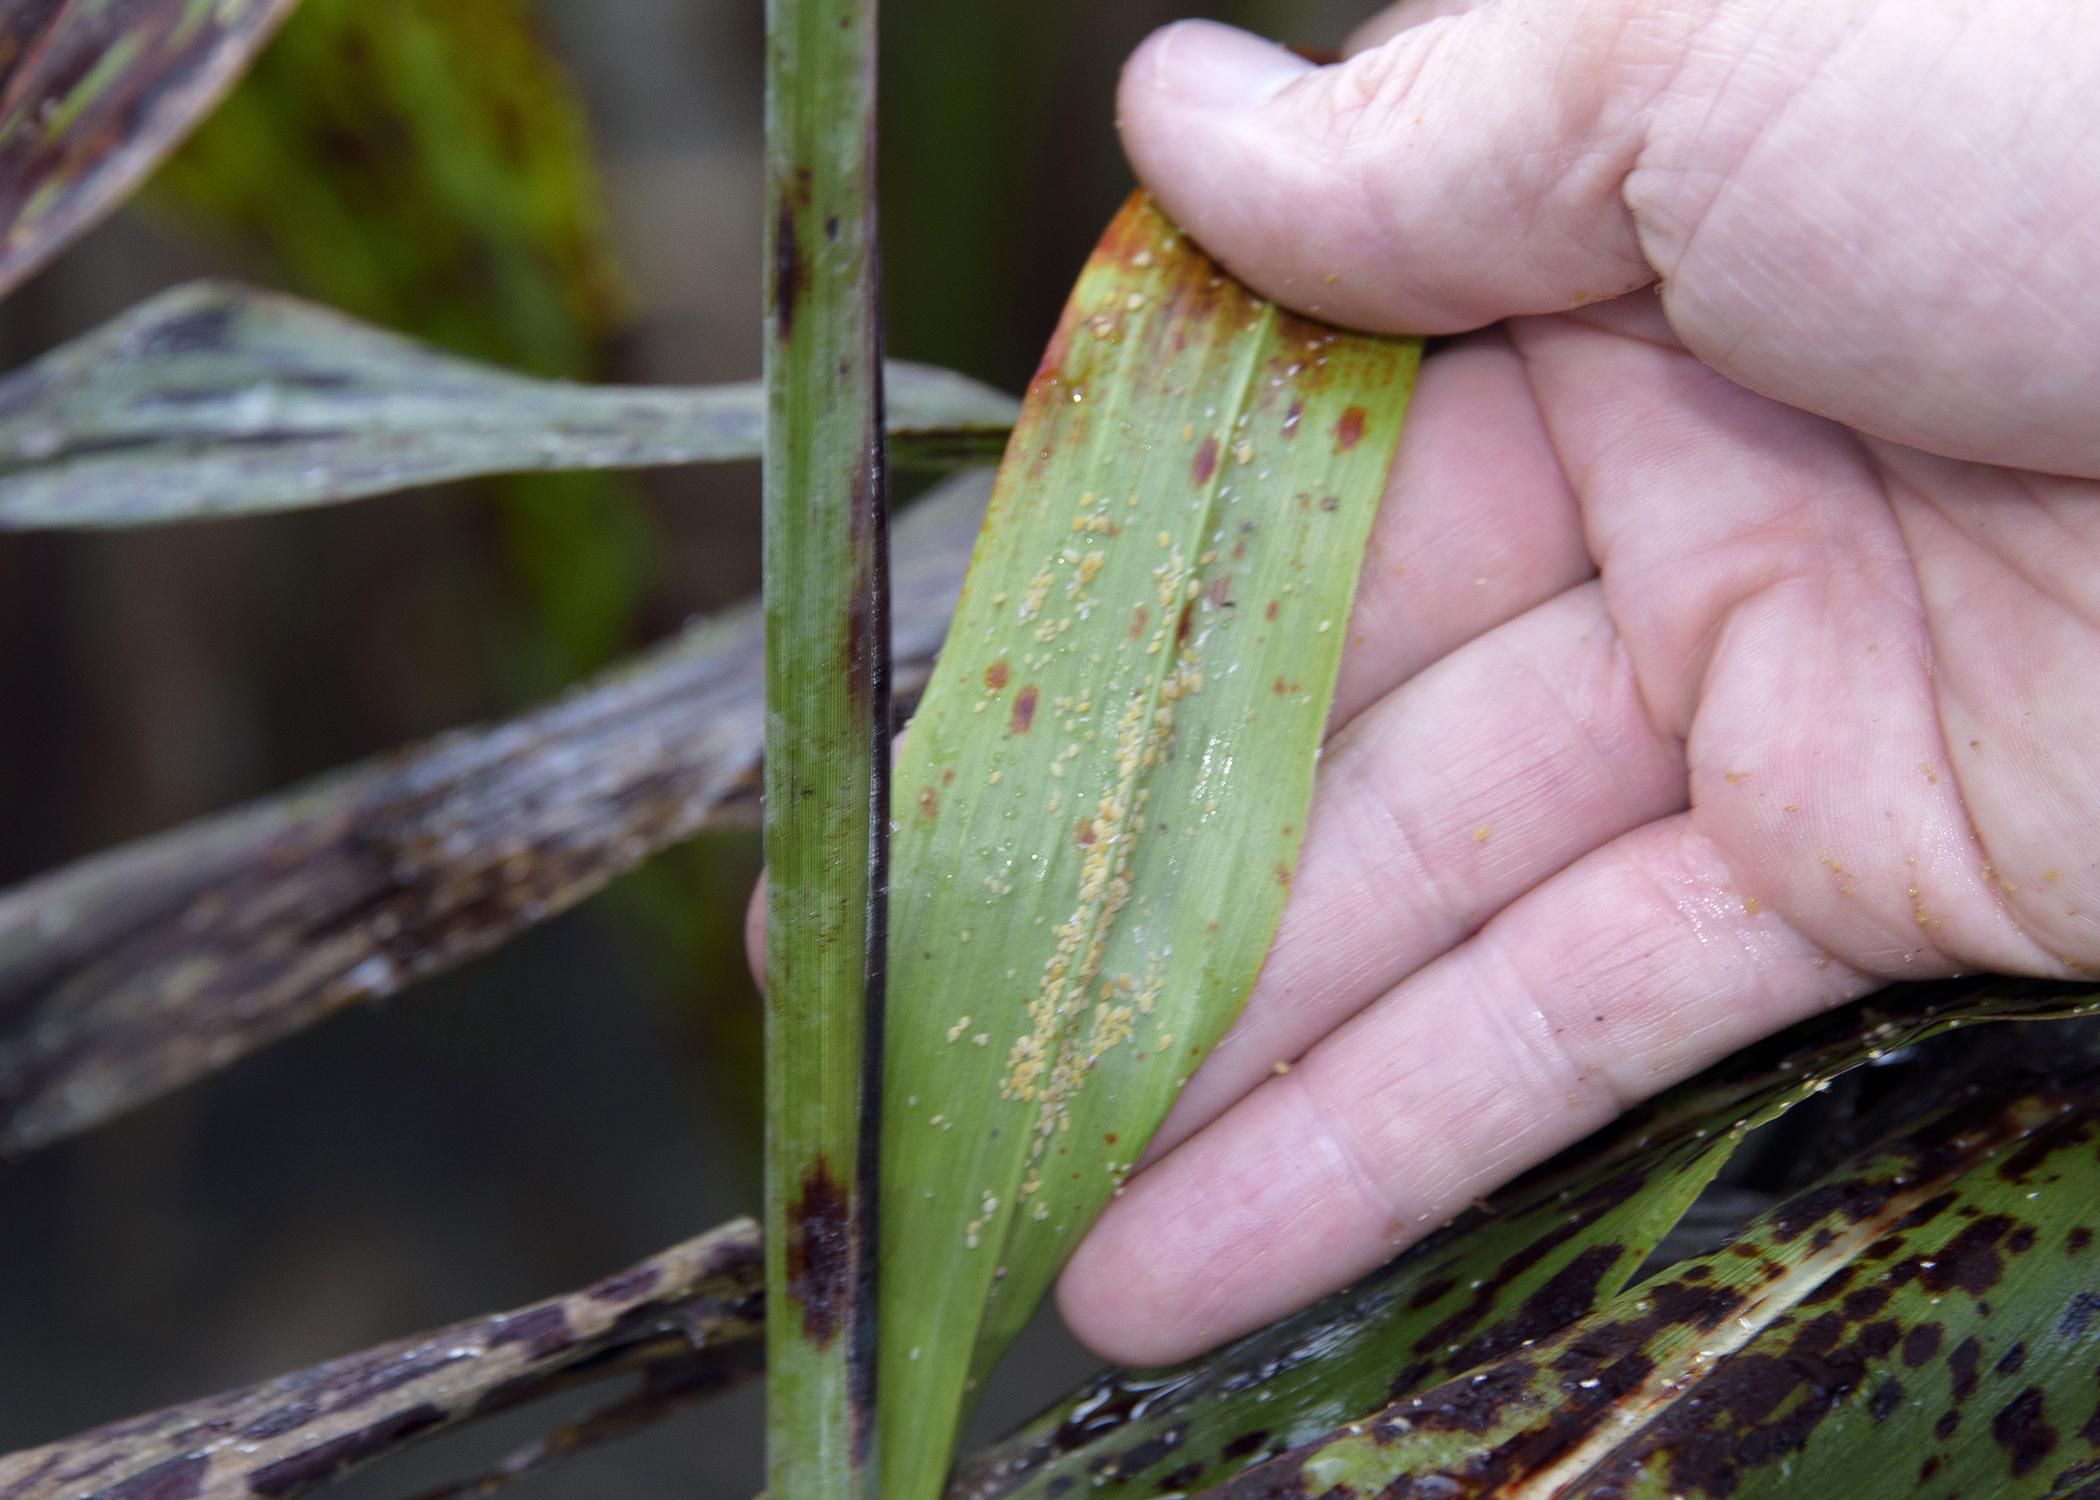 Sugarcane aphids can be seen as dozens of yellowish dots on the surface of this grain sorghum leaf on Sept. 15, 2016, on a Mississippi State University research field in Starkville. Aphids secrete a sticky substance known as honeydew after drawing nutrients from host plants. (Photo by MSU Extension Service/Kevin Hudson)